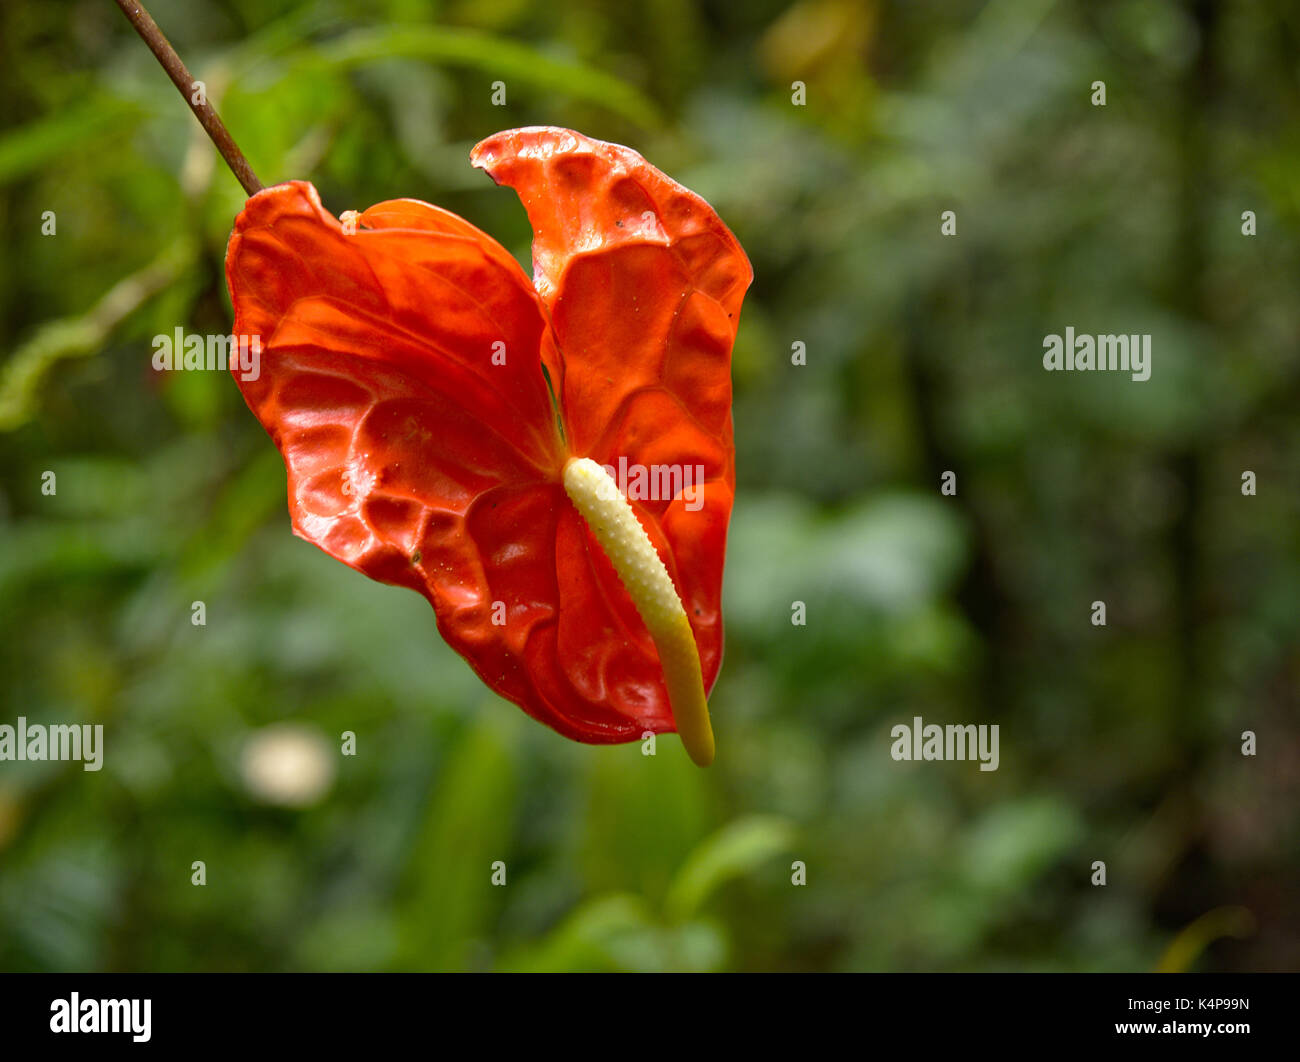 PAHUMA RESERVE, ECUADOR - 2017: A flower at Pahuma orchid reserve, located about an hour northwest of Quito. Stock Photo